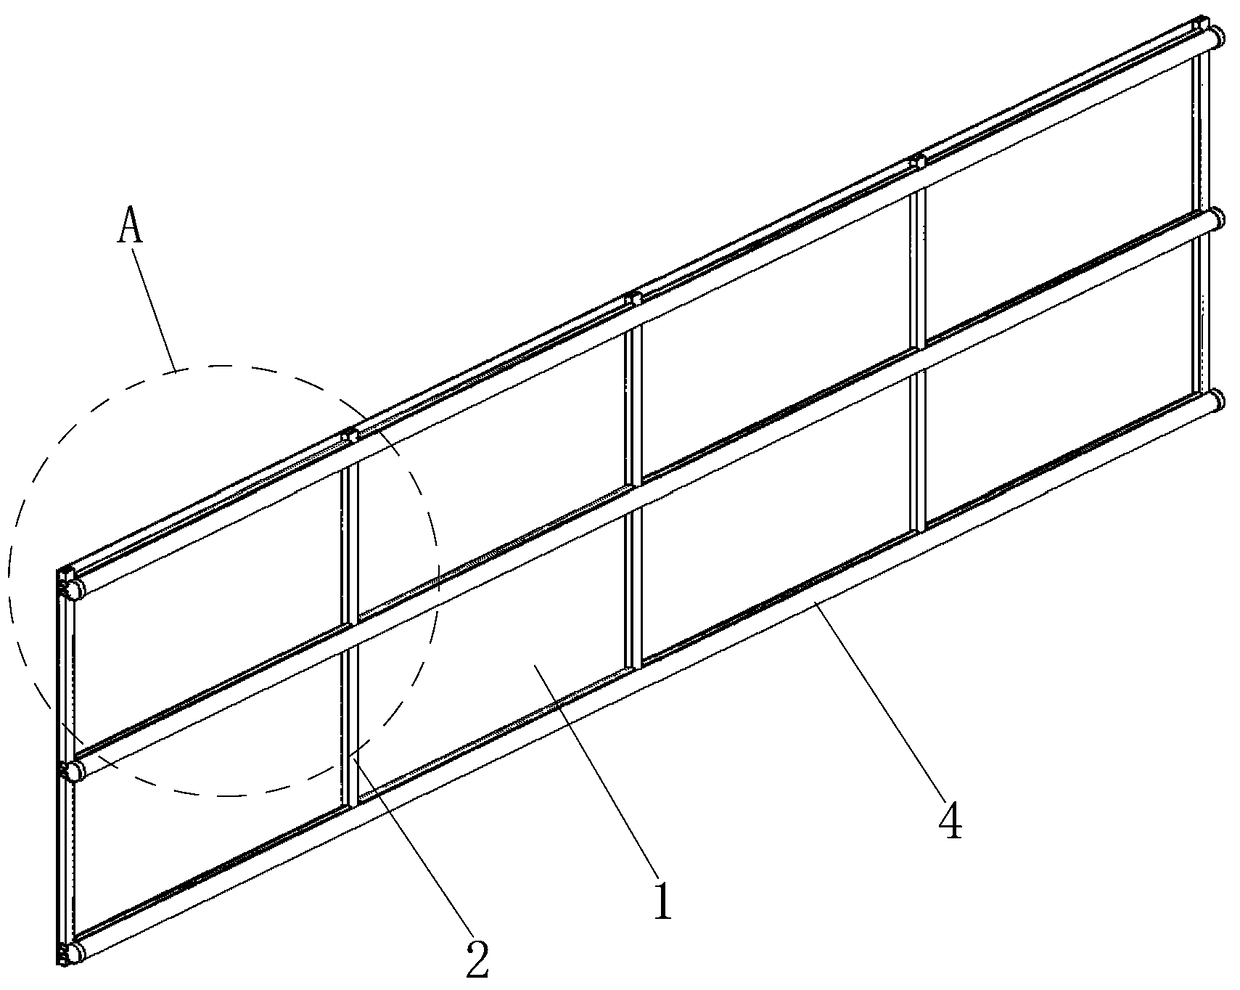 Space-based Radar Foldable and Expandable Antenna Reflector Folding Structure